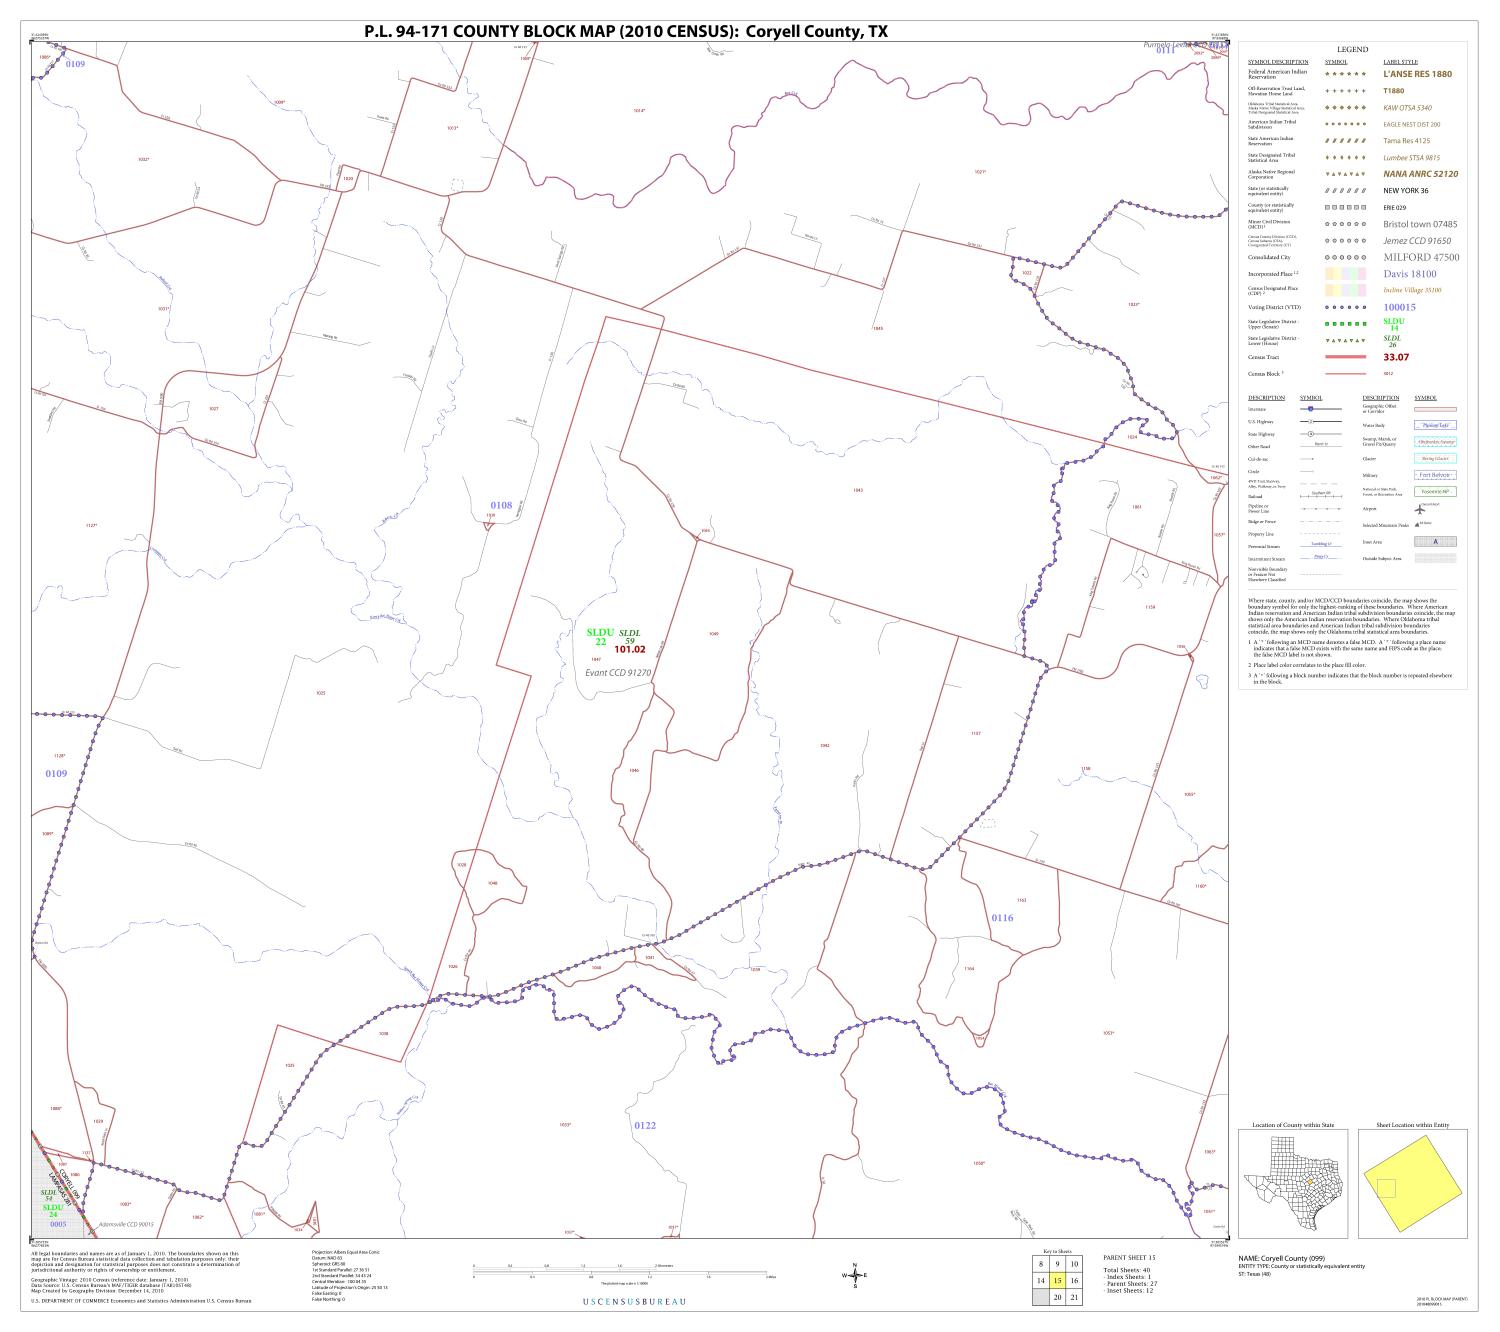 P.L. 94-171 County Block Map (2010 Census): Coryell County, Block 15
                                                
                                                    [Sequence #]: 1 of 1
                                                